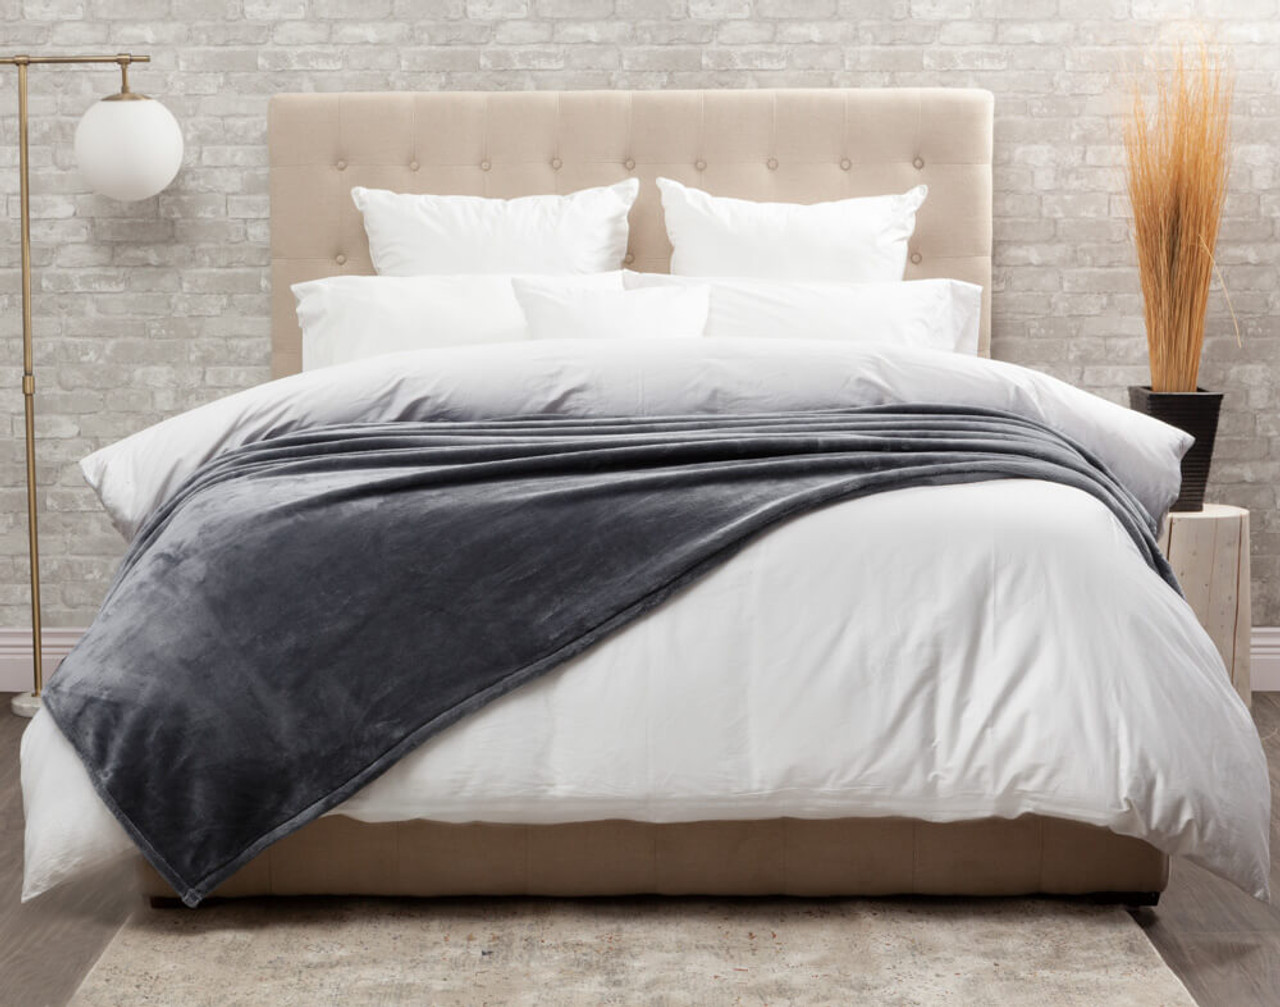 Our Grey Cashmere Touch Fleece Blanket in Volcanic Grey dressed over a comfortable white bed.